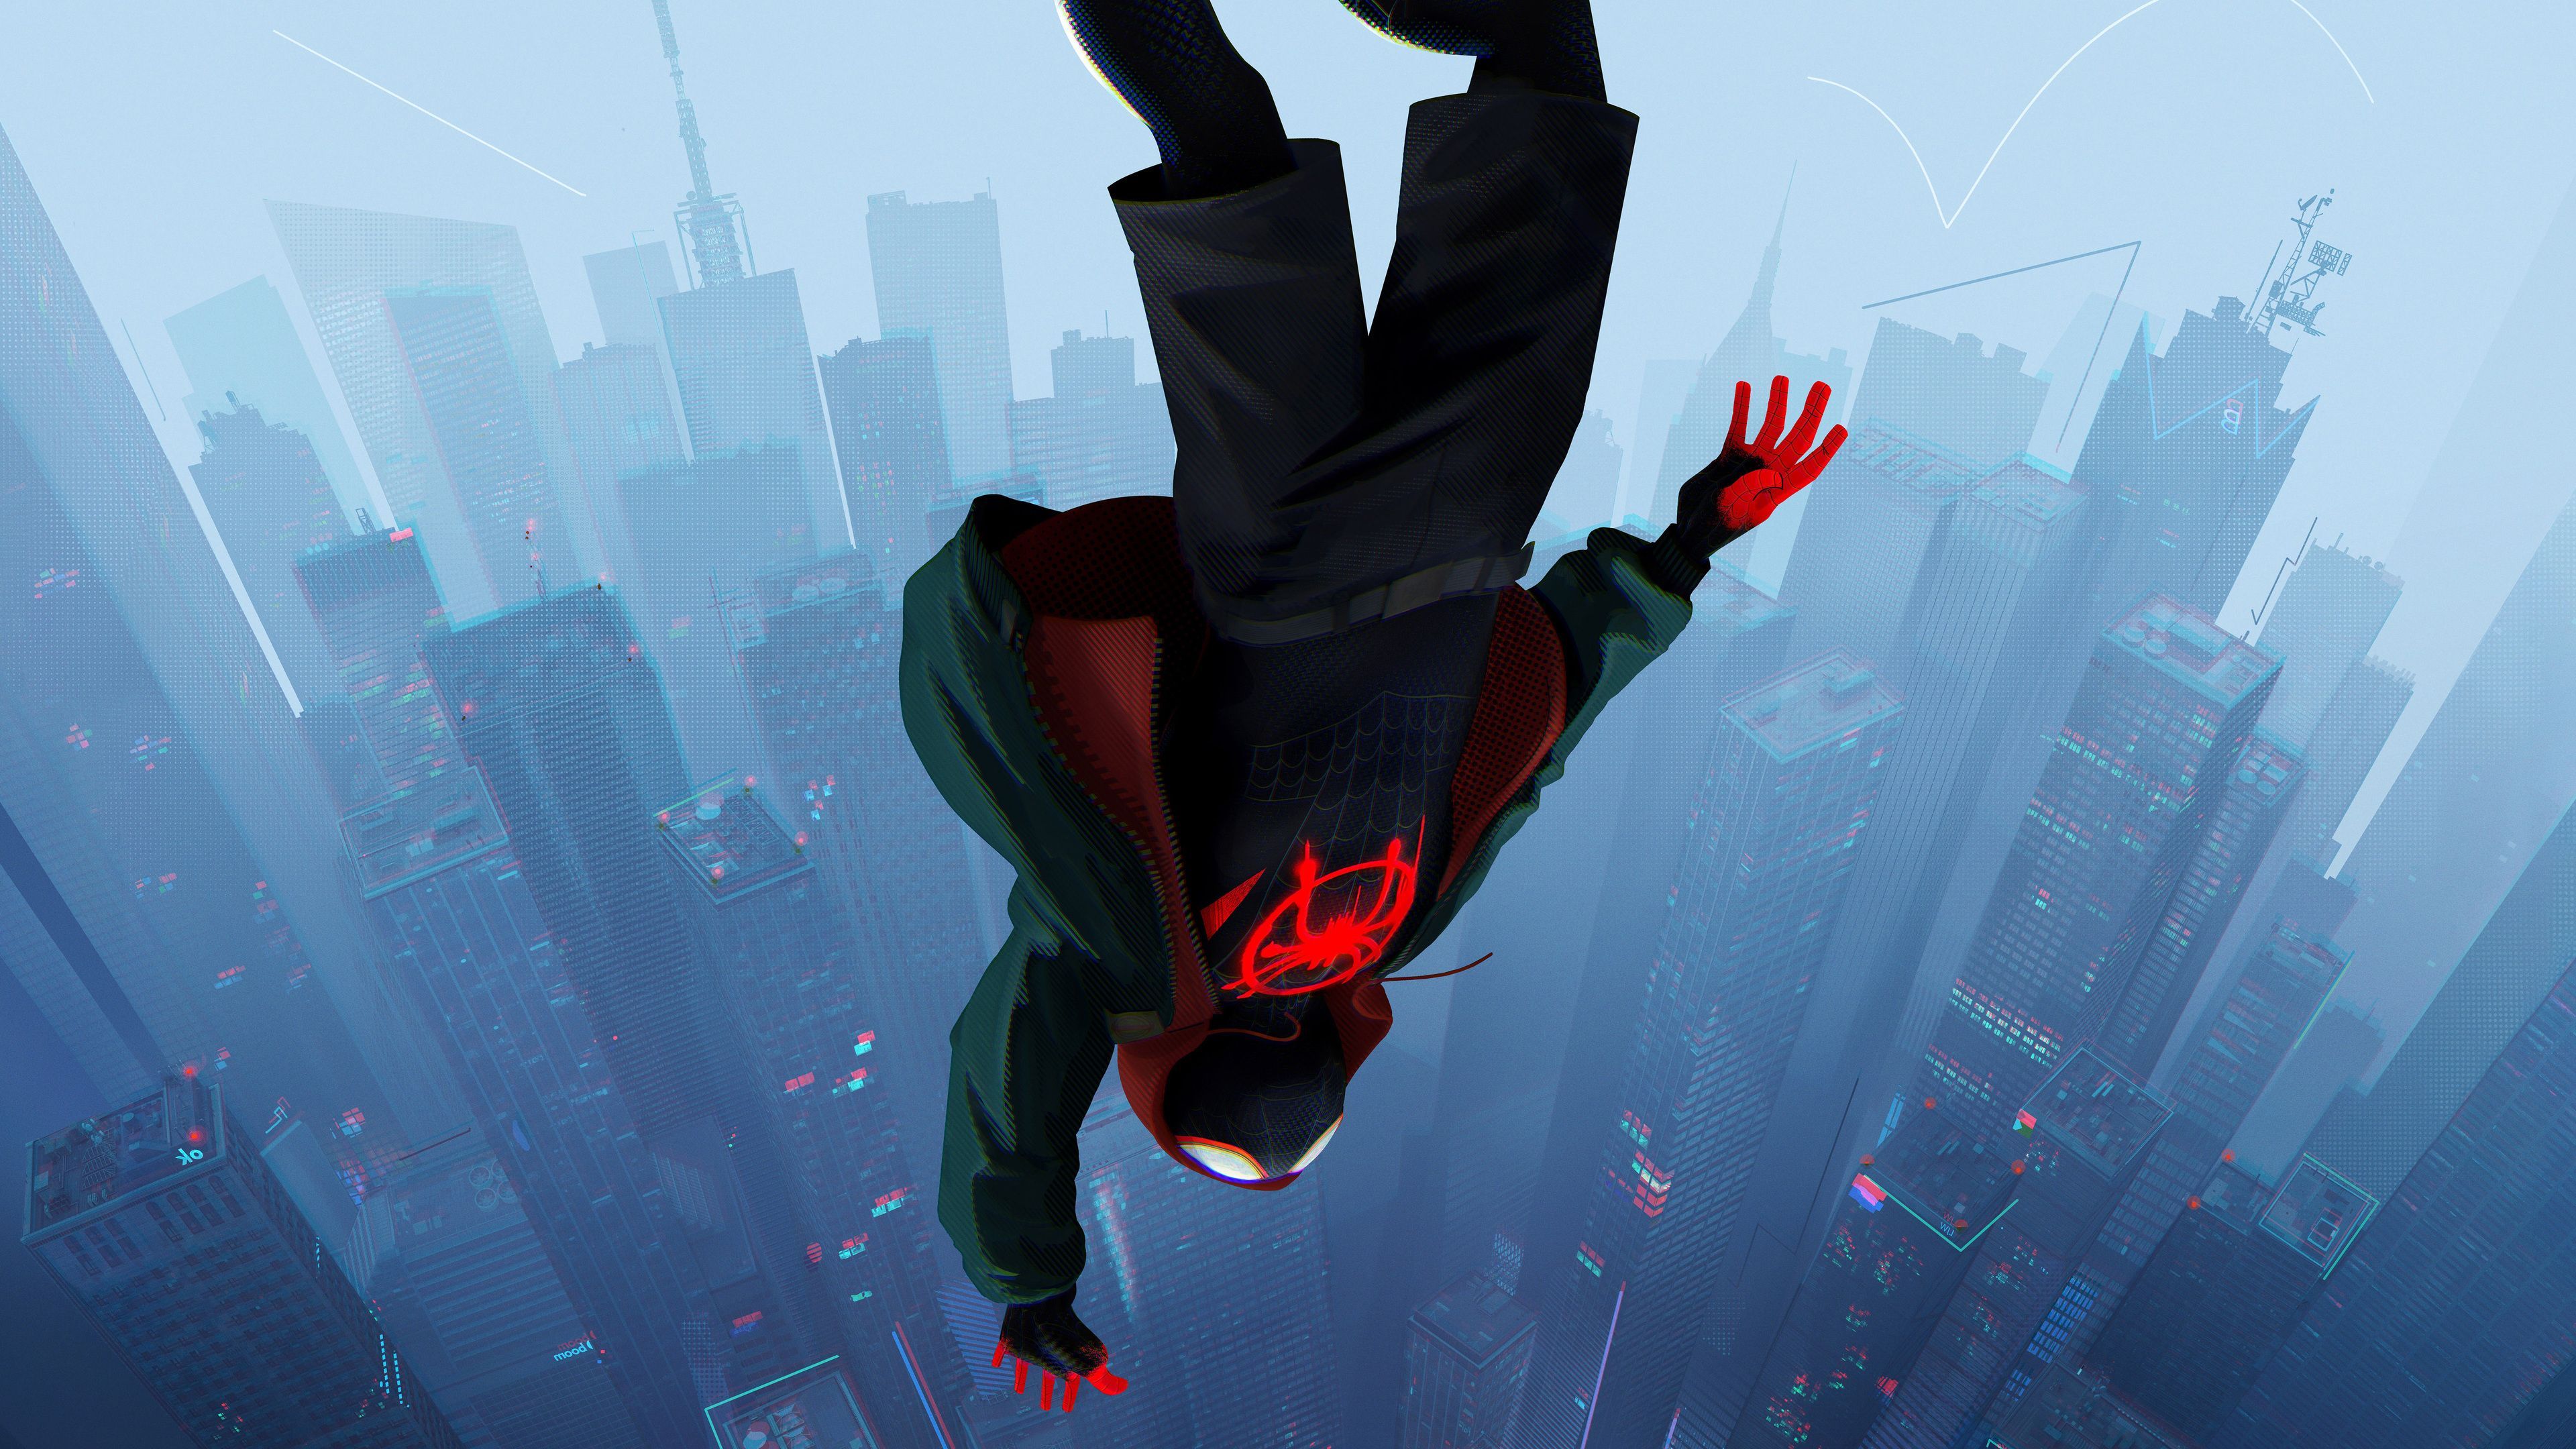 General 3840x2160 Spider Man: Into The Spider Verse Miles Morales Spider Man Marvel Comics Movies Animate. Marvel Comics Wallpaper, Spider Verse, Movie Wallpaper